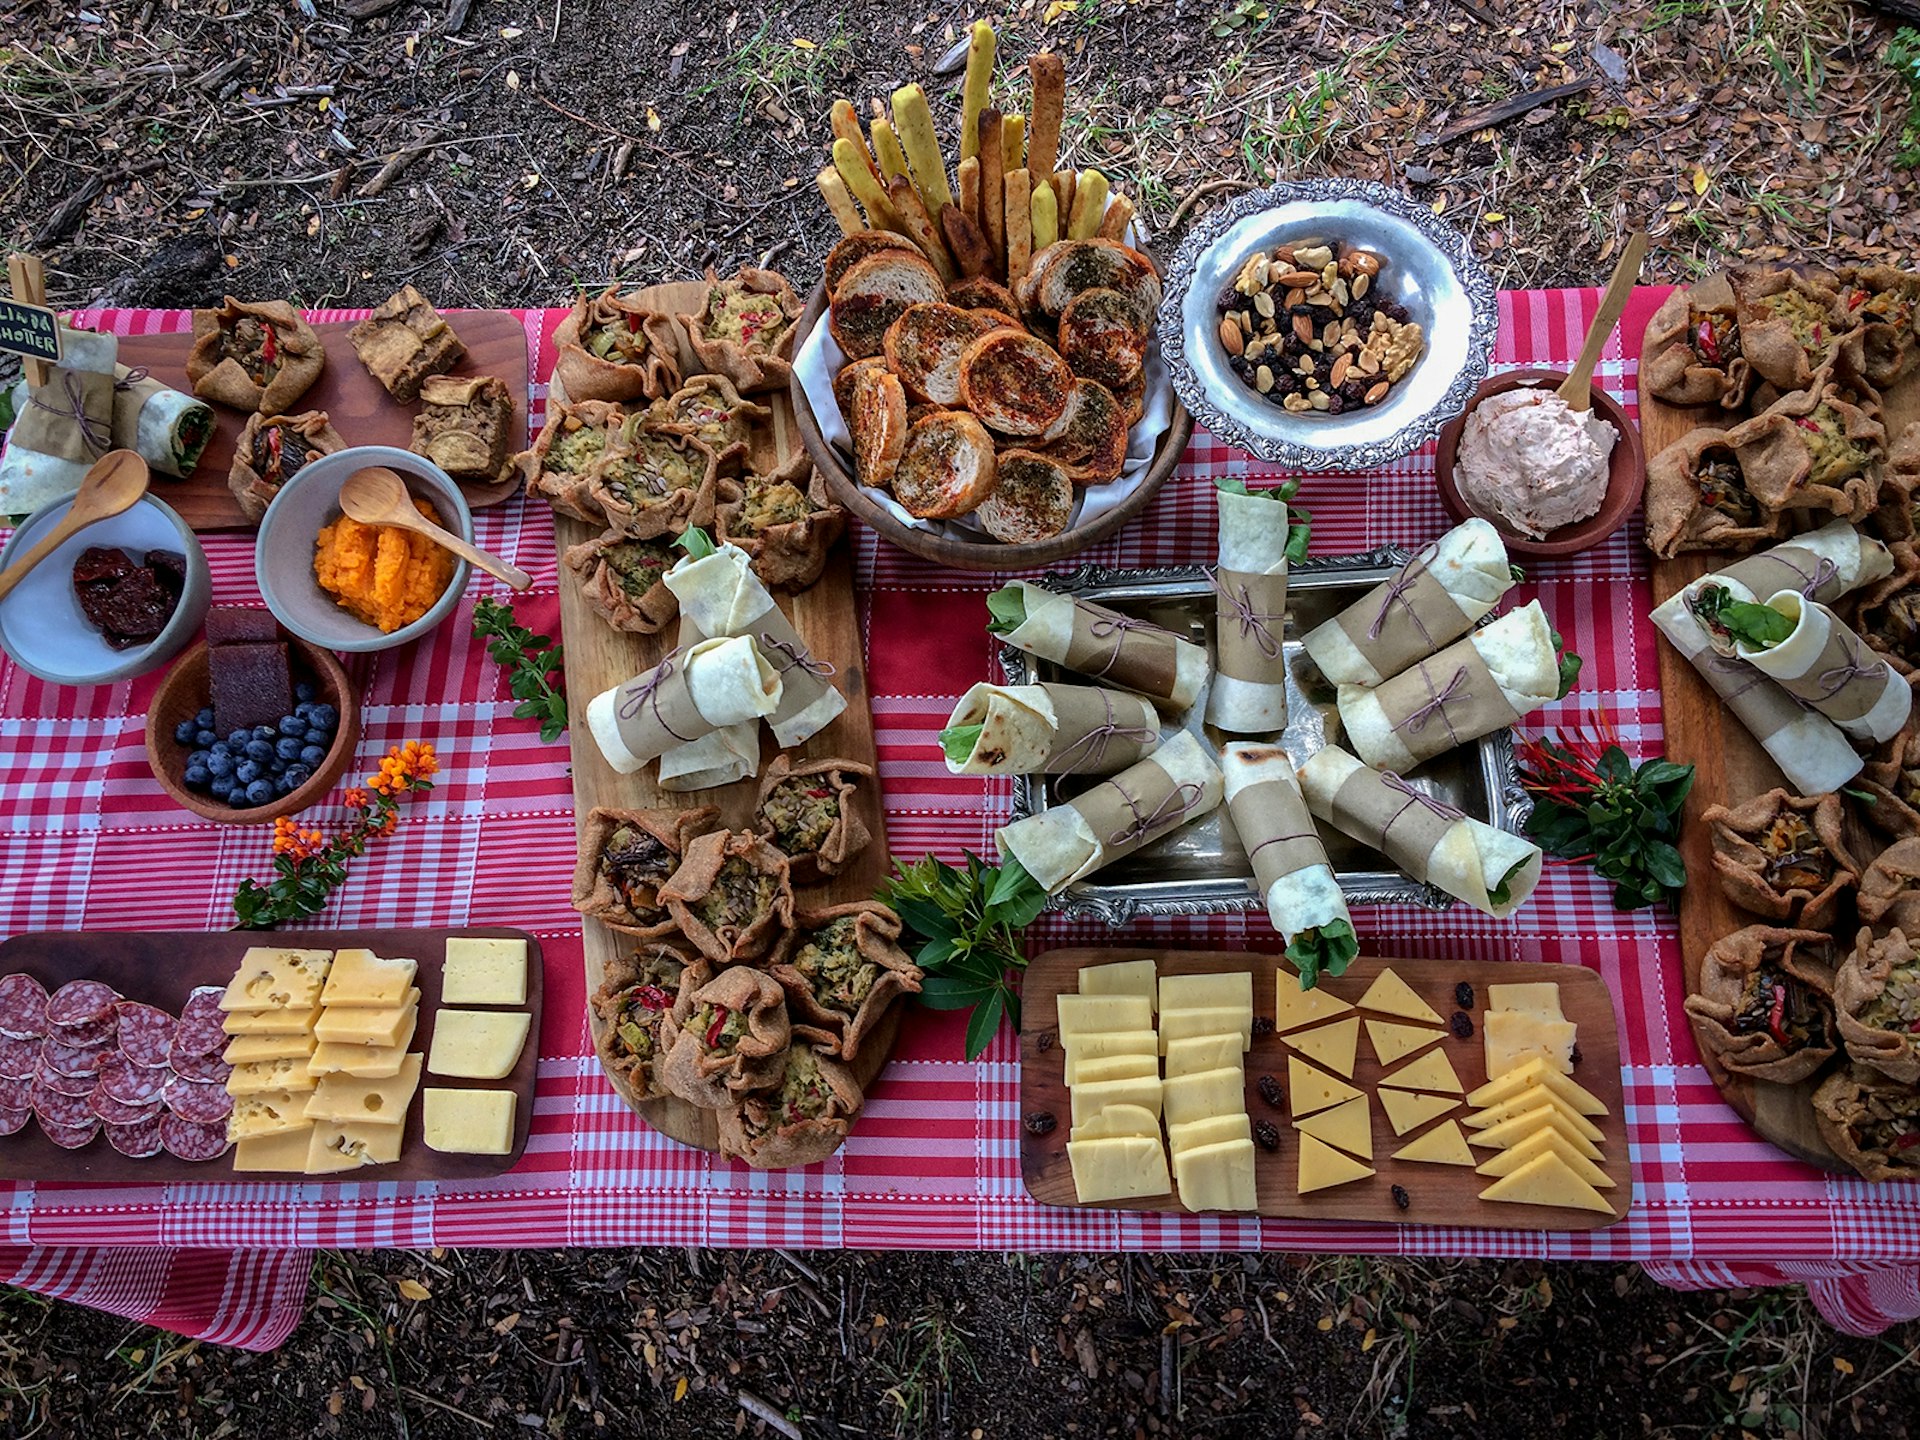 Food spread out on a colorful tablecloth in the forest